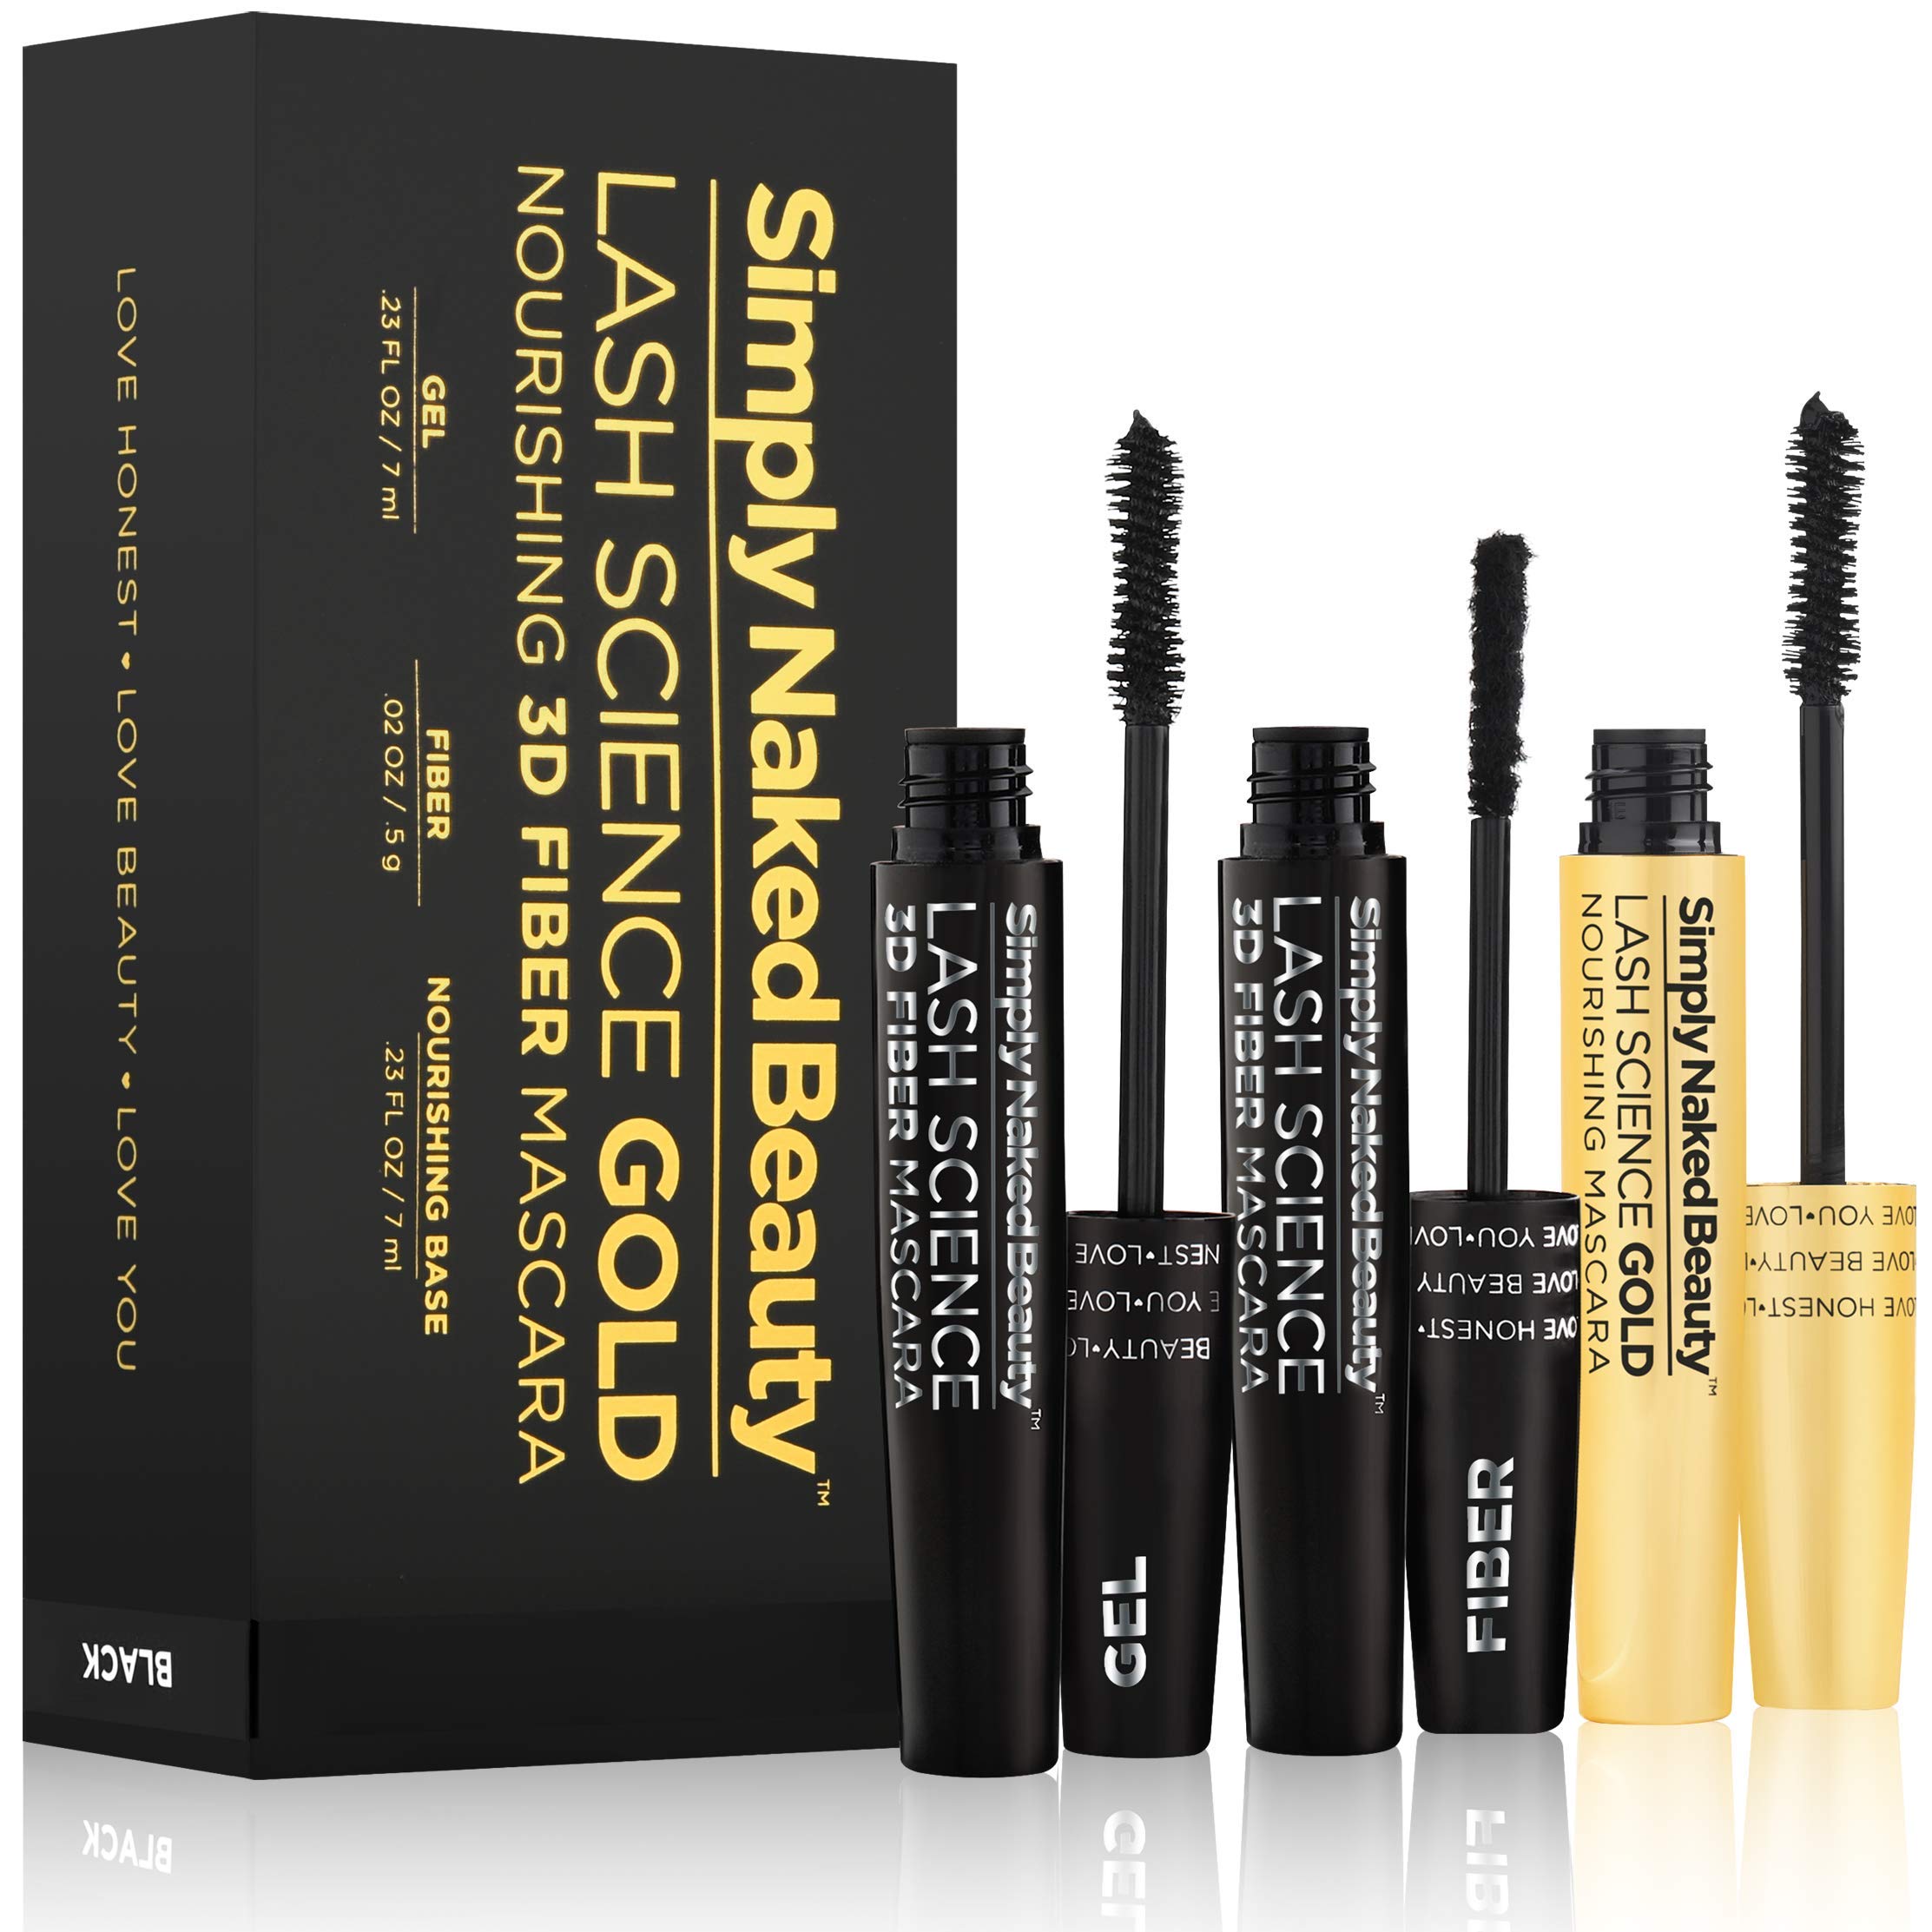 3D Black Mascara for Volume & Length - Eyelash Growth Nourishing Base, Black Mascara Gel & Dry Fibers to create 3D Lengthening Effect. Non-Toxic & Cruelty Free by Simply Naked Beauty